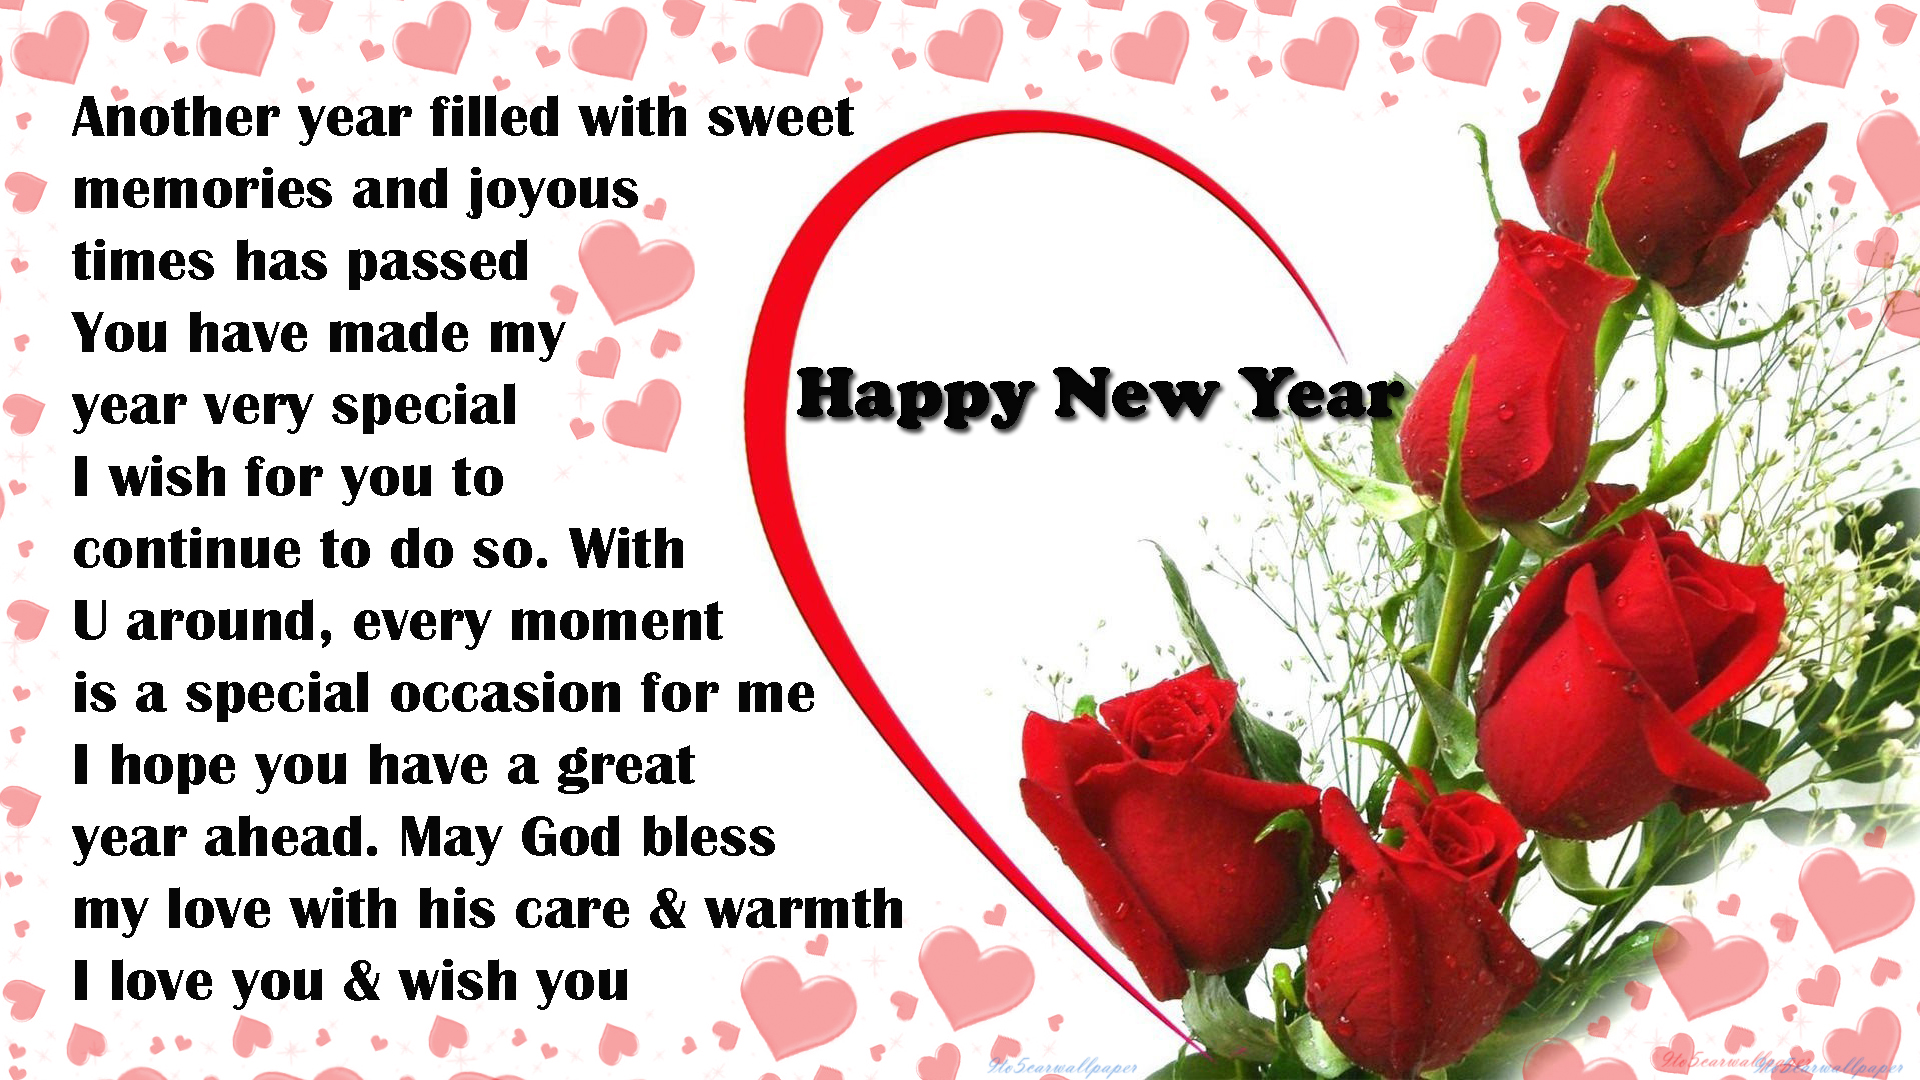 happy-new-year-love-wish-card-poster